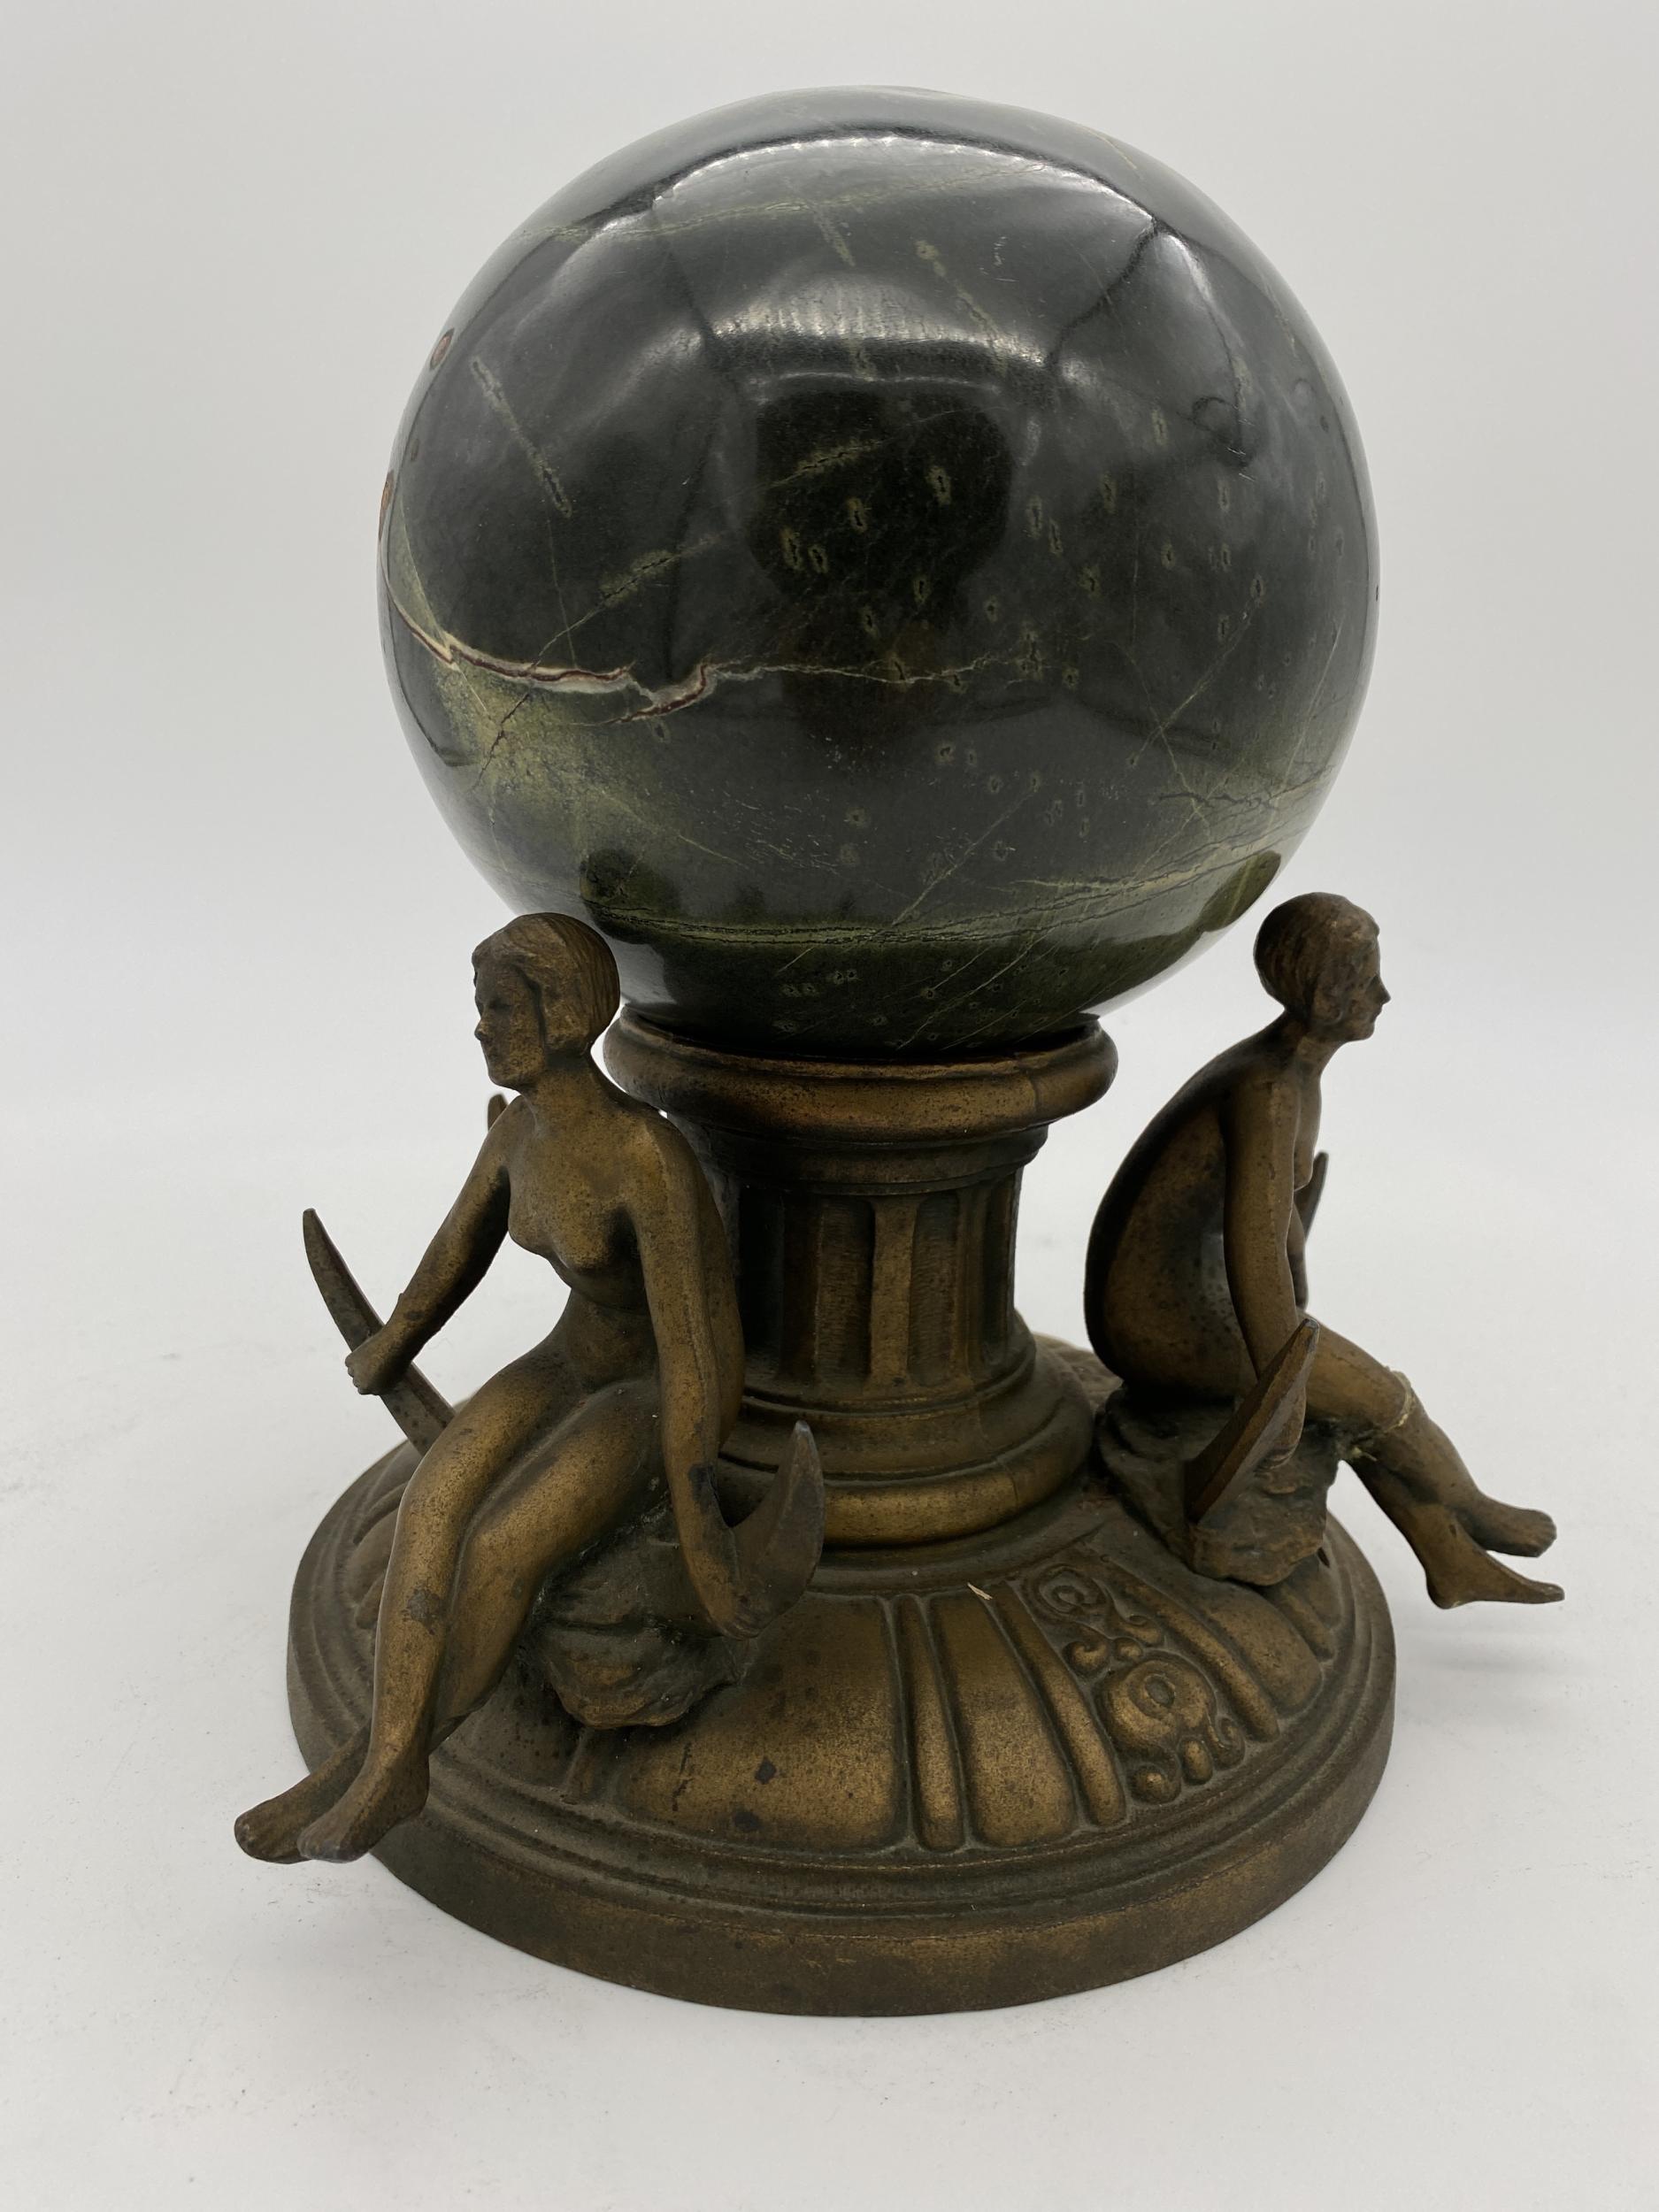 Repurposed Nuart lamp base which has been modified to be a decorative object with a hand carved black Italian sphere. The bronze plate spelter metal base features 3 nude flappers girls sitting on crescent moons fixed to a early Art Deco base.